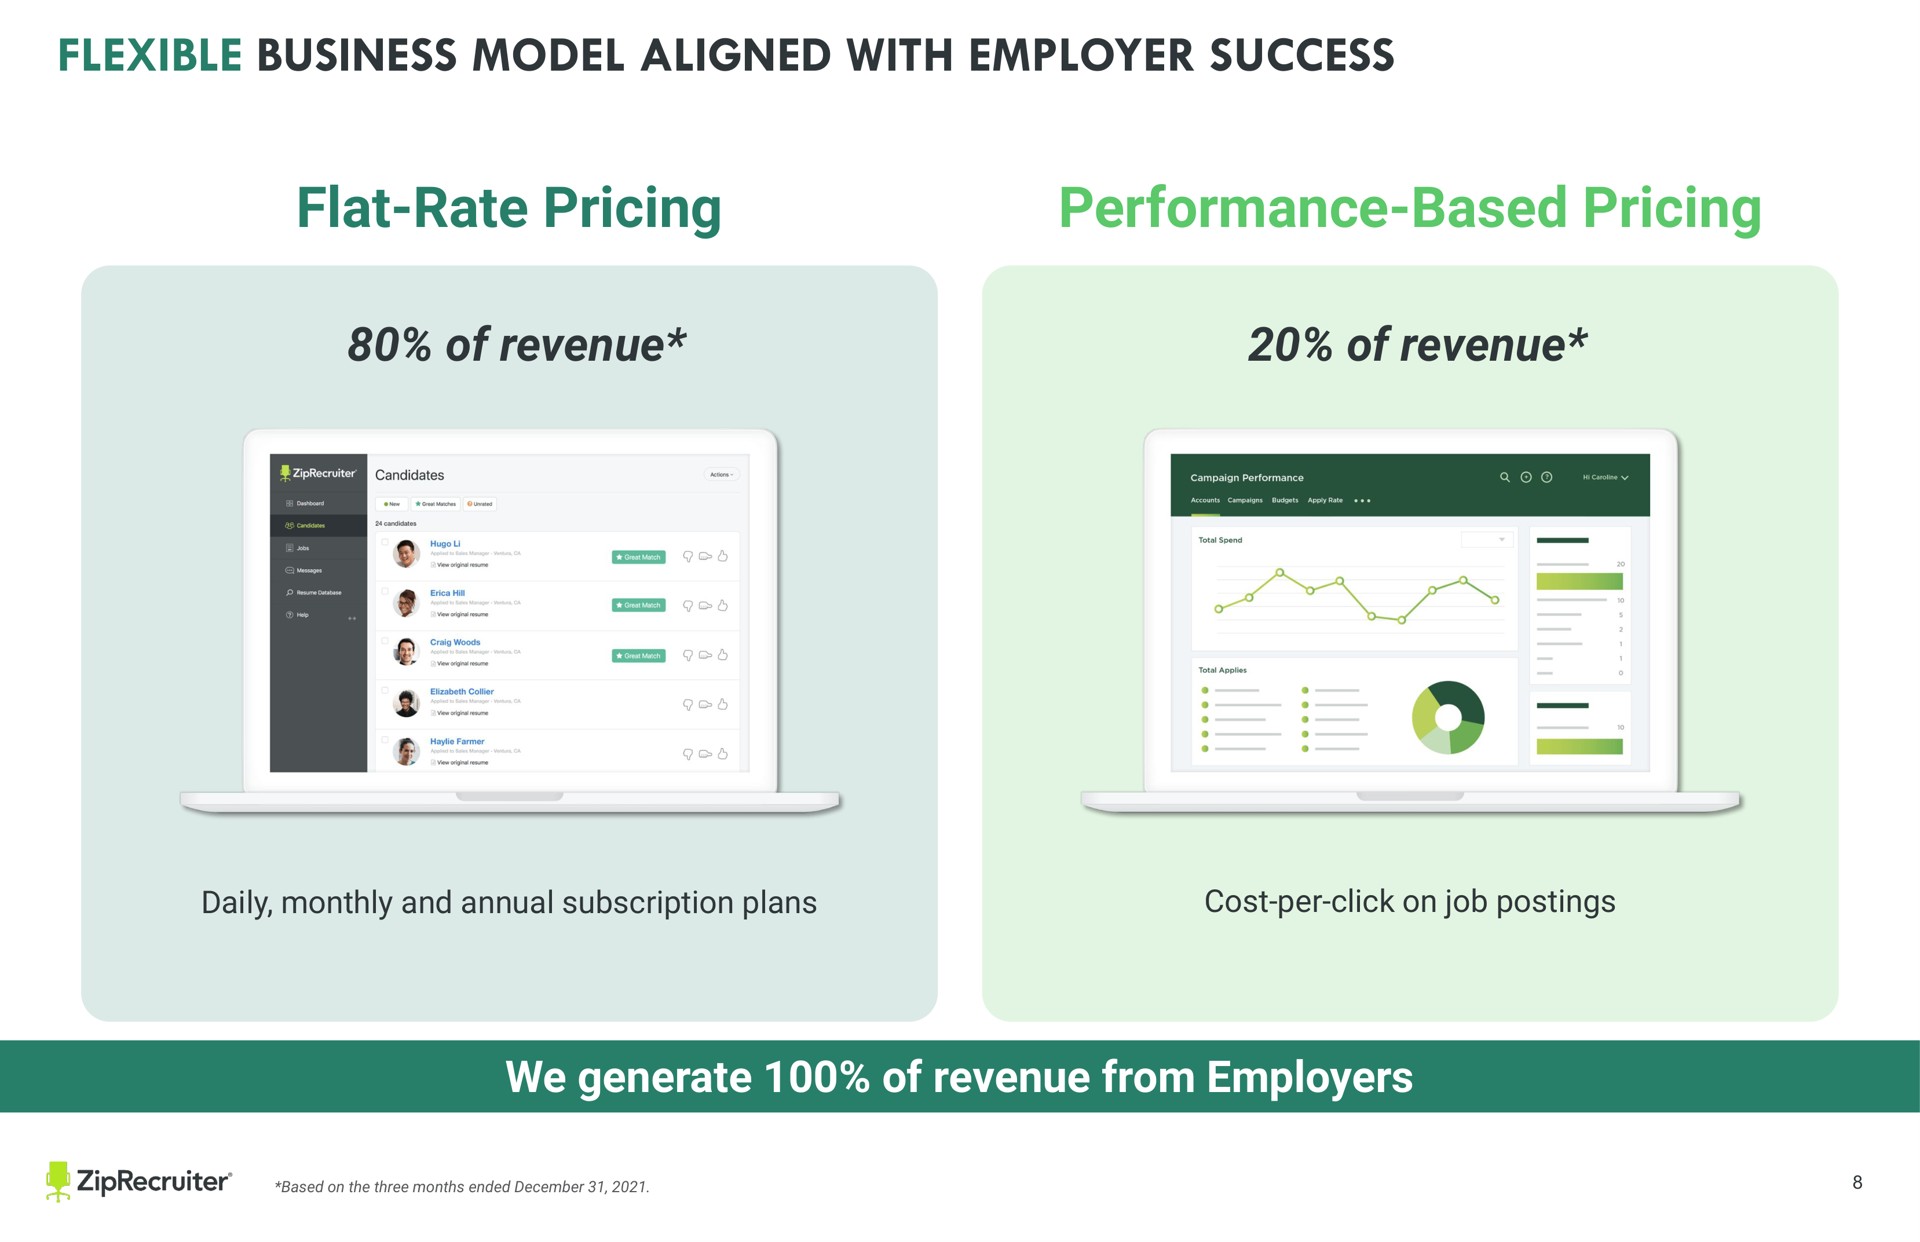 text a a a flat rate pricing performance based pricing of revenue of revenue daily monthly and annual subscription plans cost per click on job postings we generate of revenue from employers keep all text and images other than full slide backgrounds from the sides of the slide to avoid being cut off when printed flexible business model aligned with employer success | ZipRecruiter